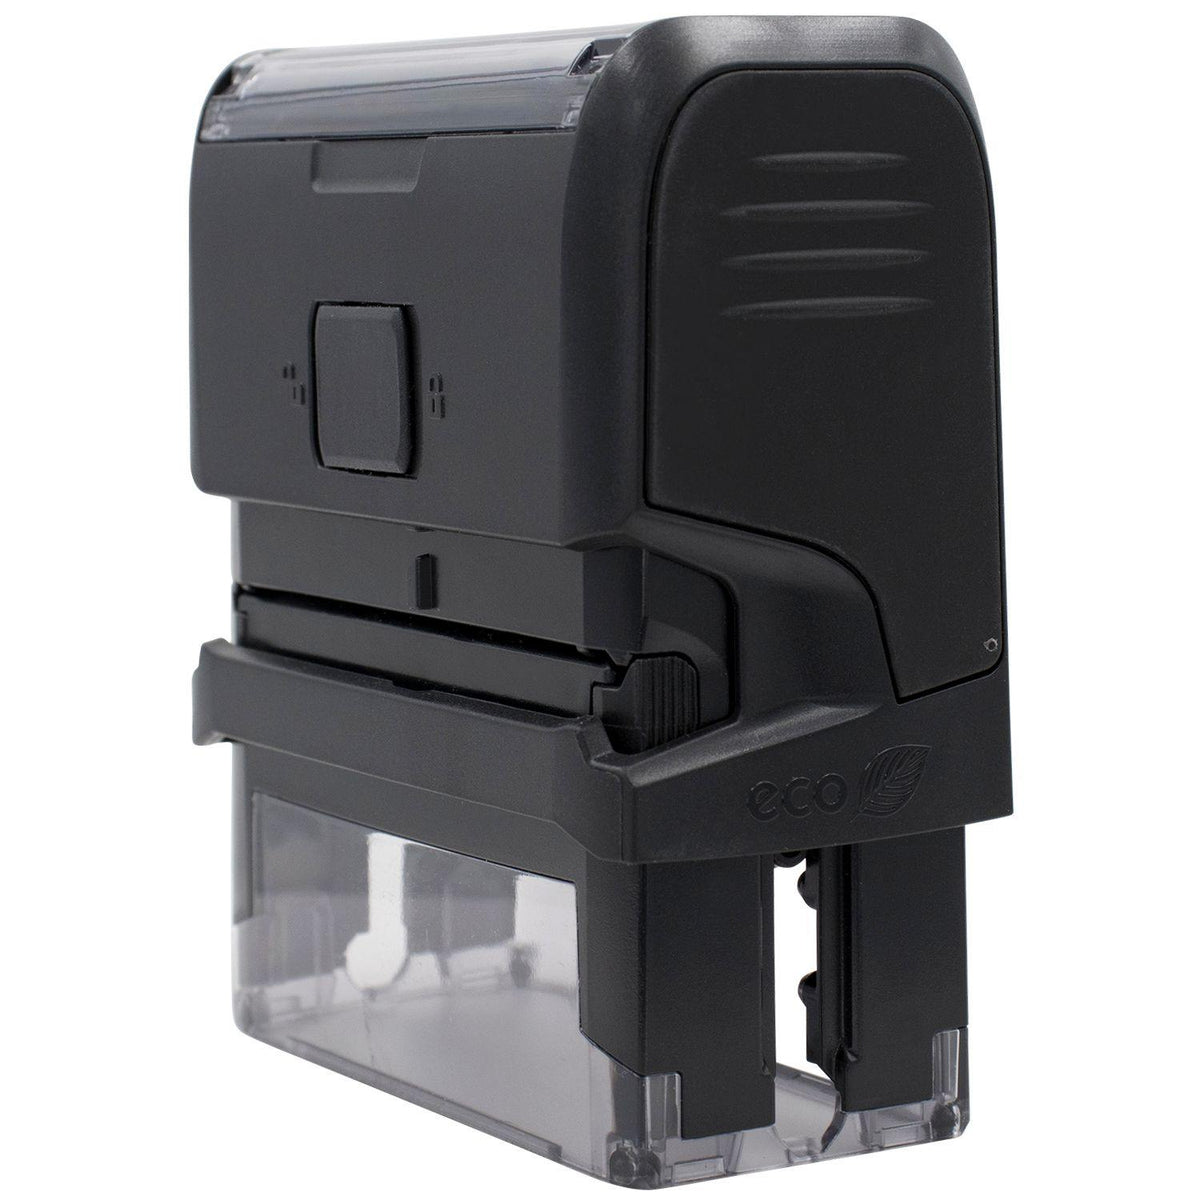 Self Inking Hippa Stamp - Engineer Seal Stamps - Brand_Trodat, Impression Size_Small, Stamp Type_Self-Inking Stamp, Type of Use_Medical Office